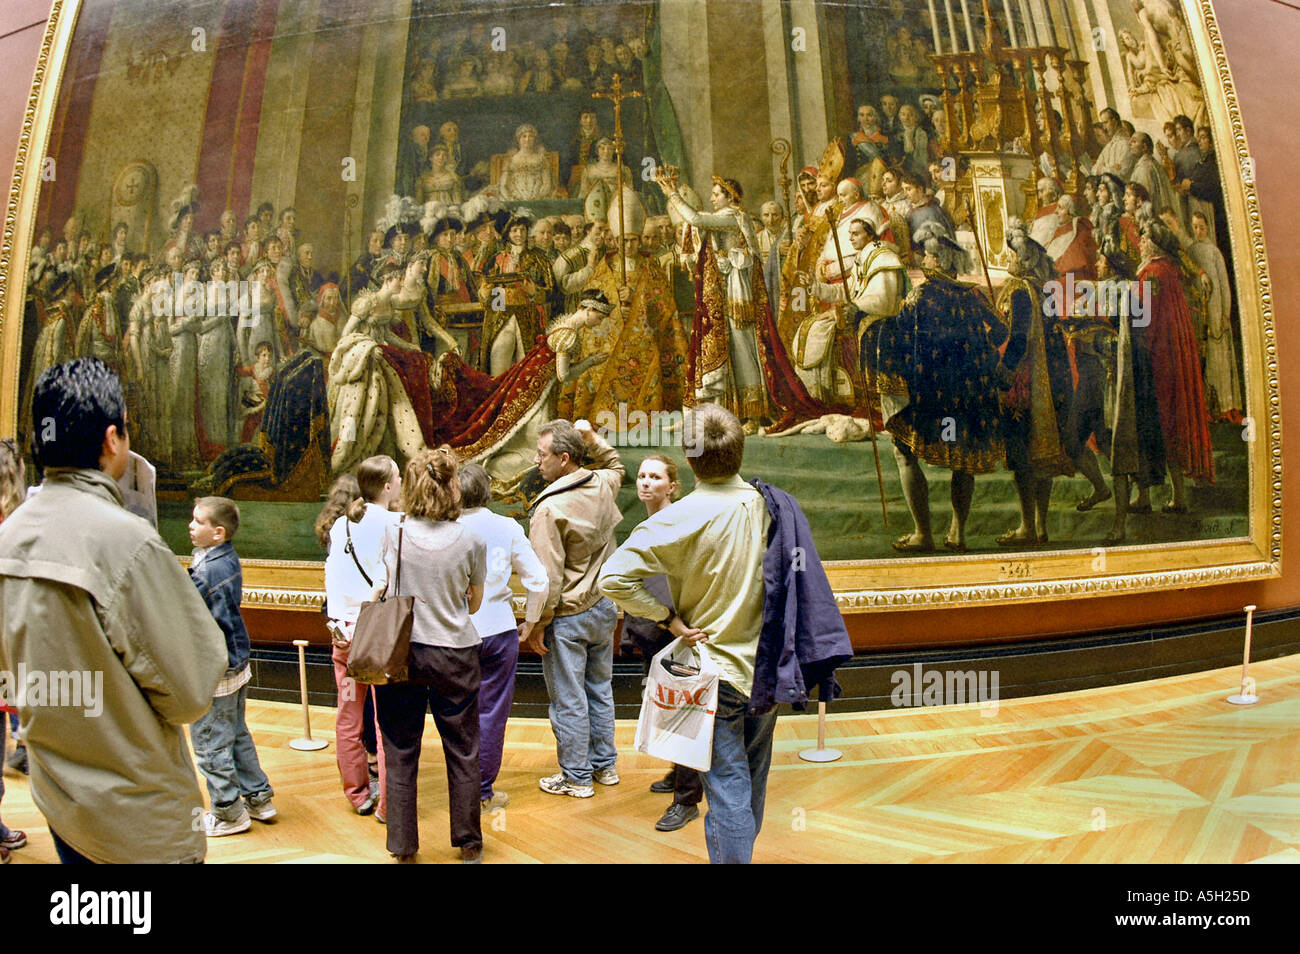 PARIS France, Louvre Museum Group Tourists Looking at 'French Classical Paintings' Exhibit Artist Credit: David Stock Photo